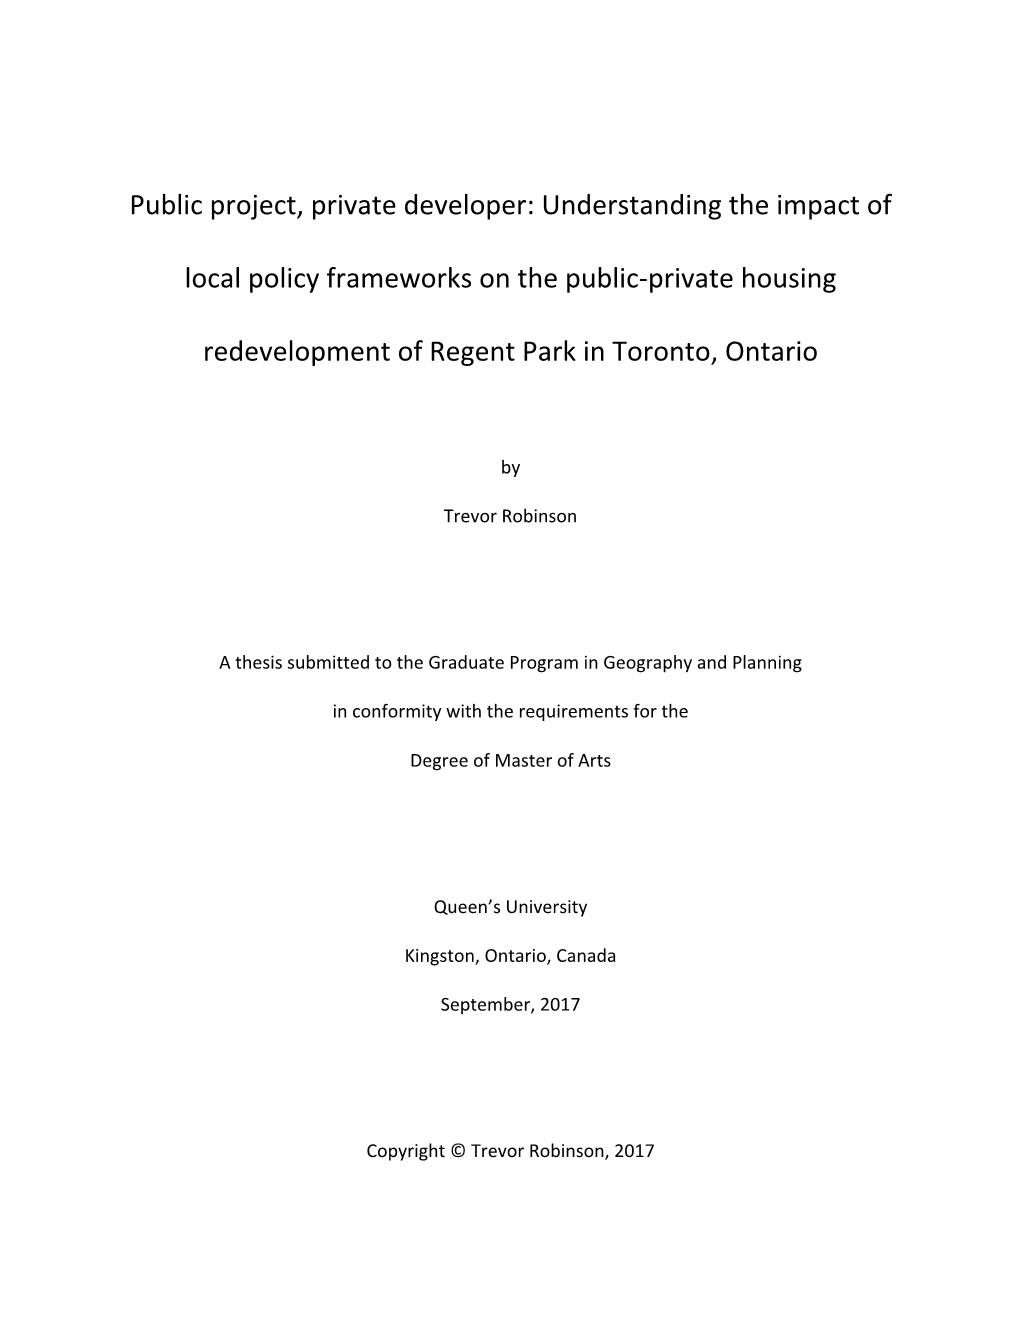 Public Project, Private Developer: Understanding the Impact of Local